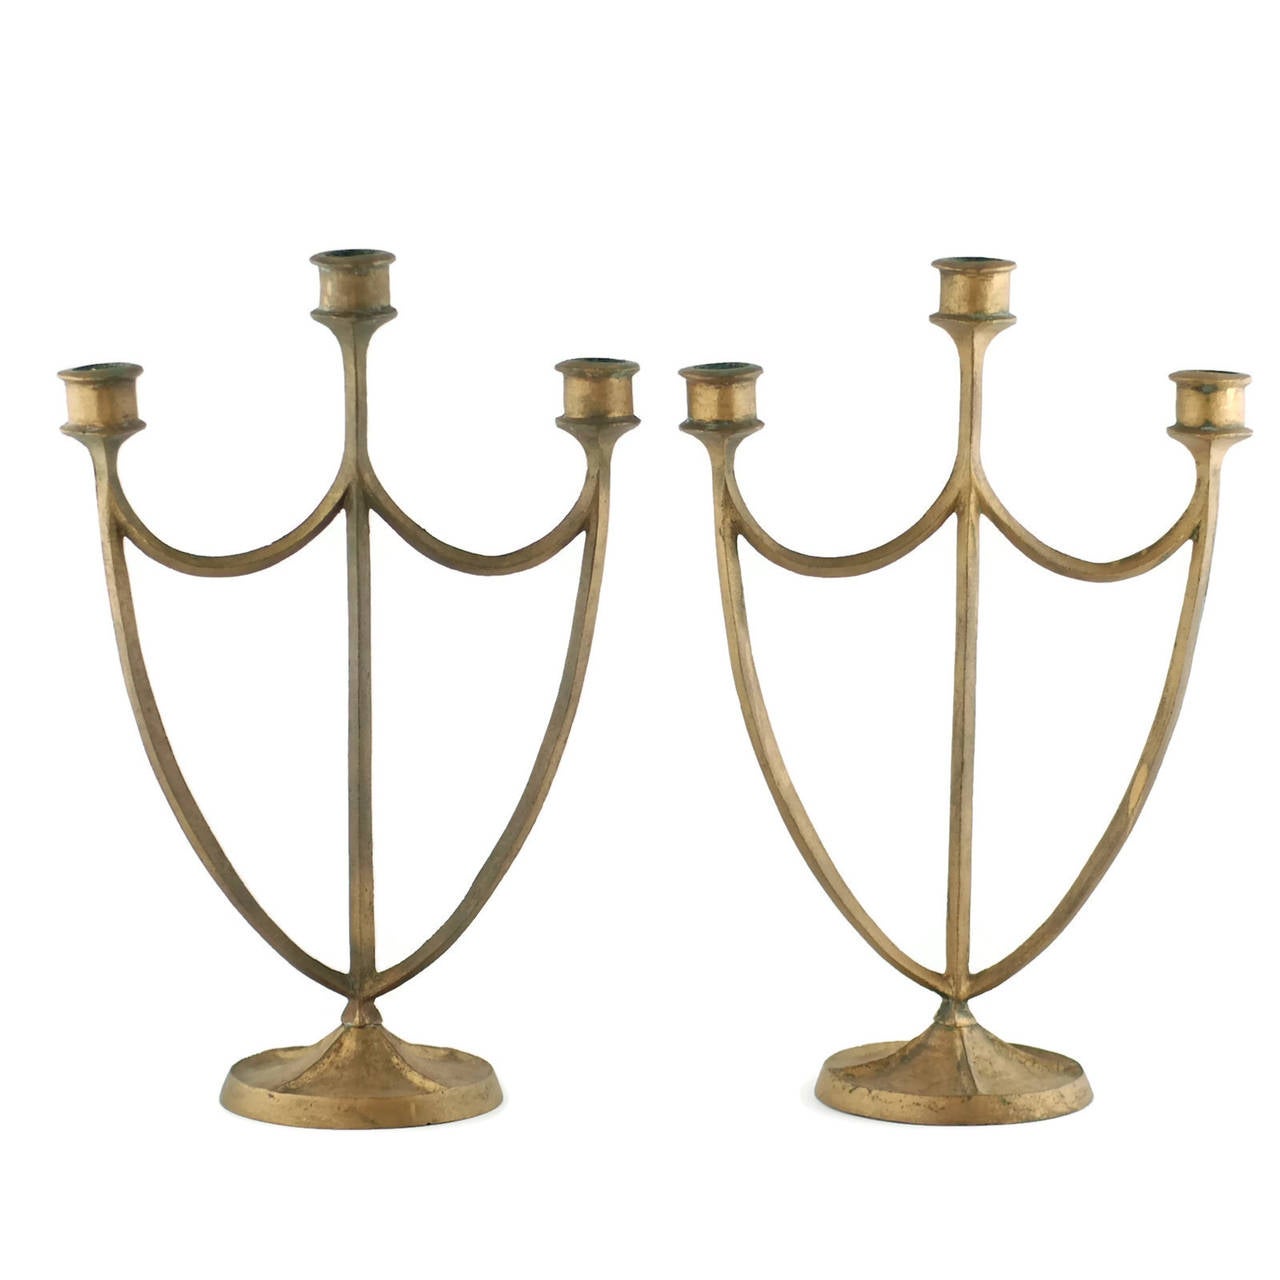 This set of three-arm bronze candelabra was made by multitalented artist and sculptor Edward Timothy Hurley (1869-1950). Hurley studied at the Art Academy of Cincinnati where he excelled in drypoint etching under the tutelage of noted painter Frank